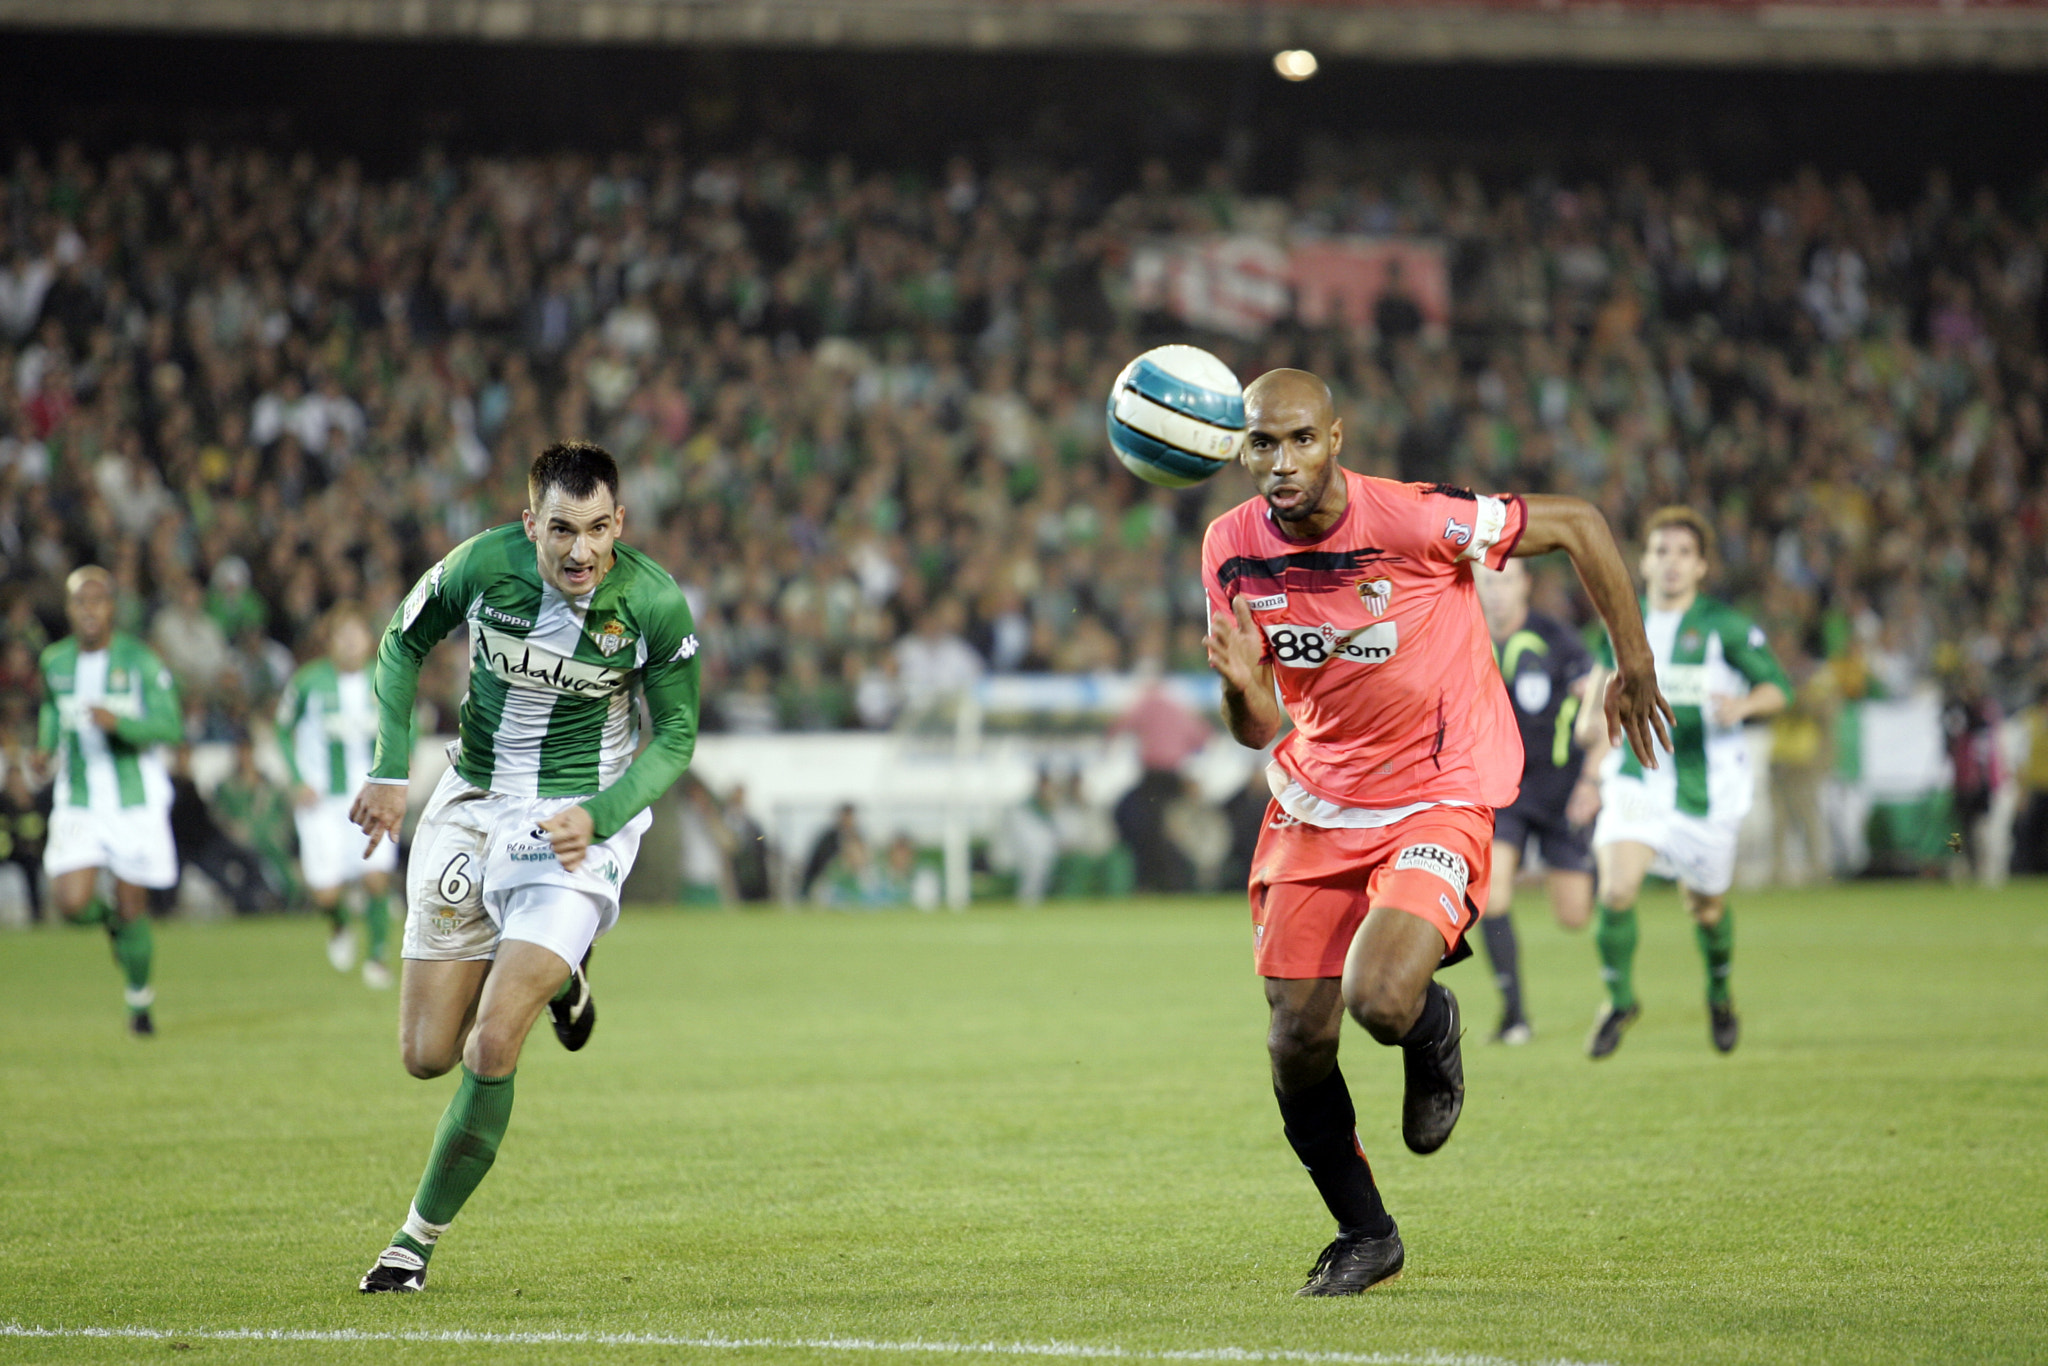 Kanoute and Ilic pursuing the ball. Local derby of the Spanish Liga between Real Betis Balompie and